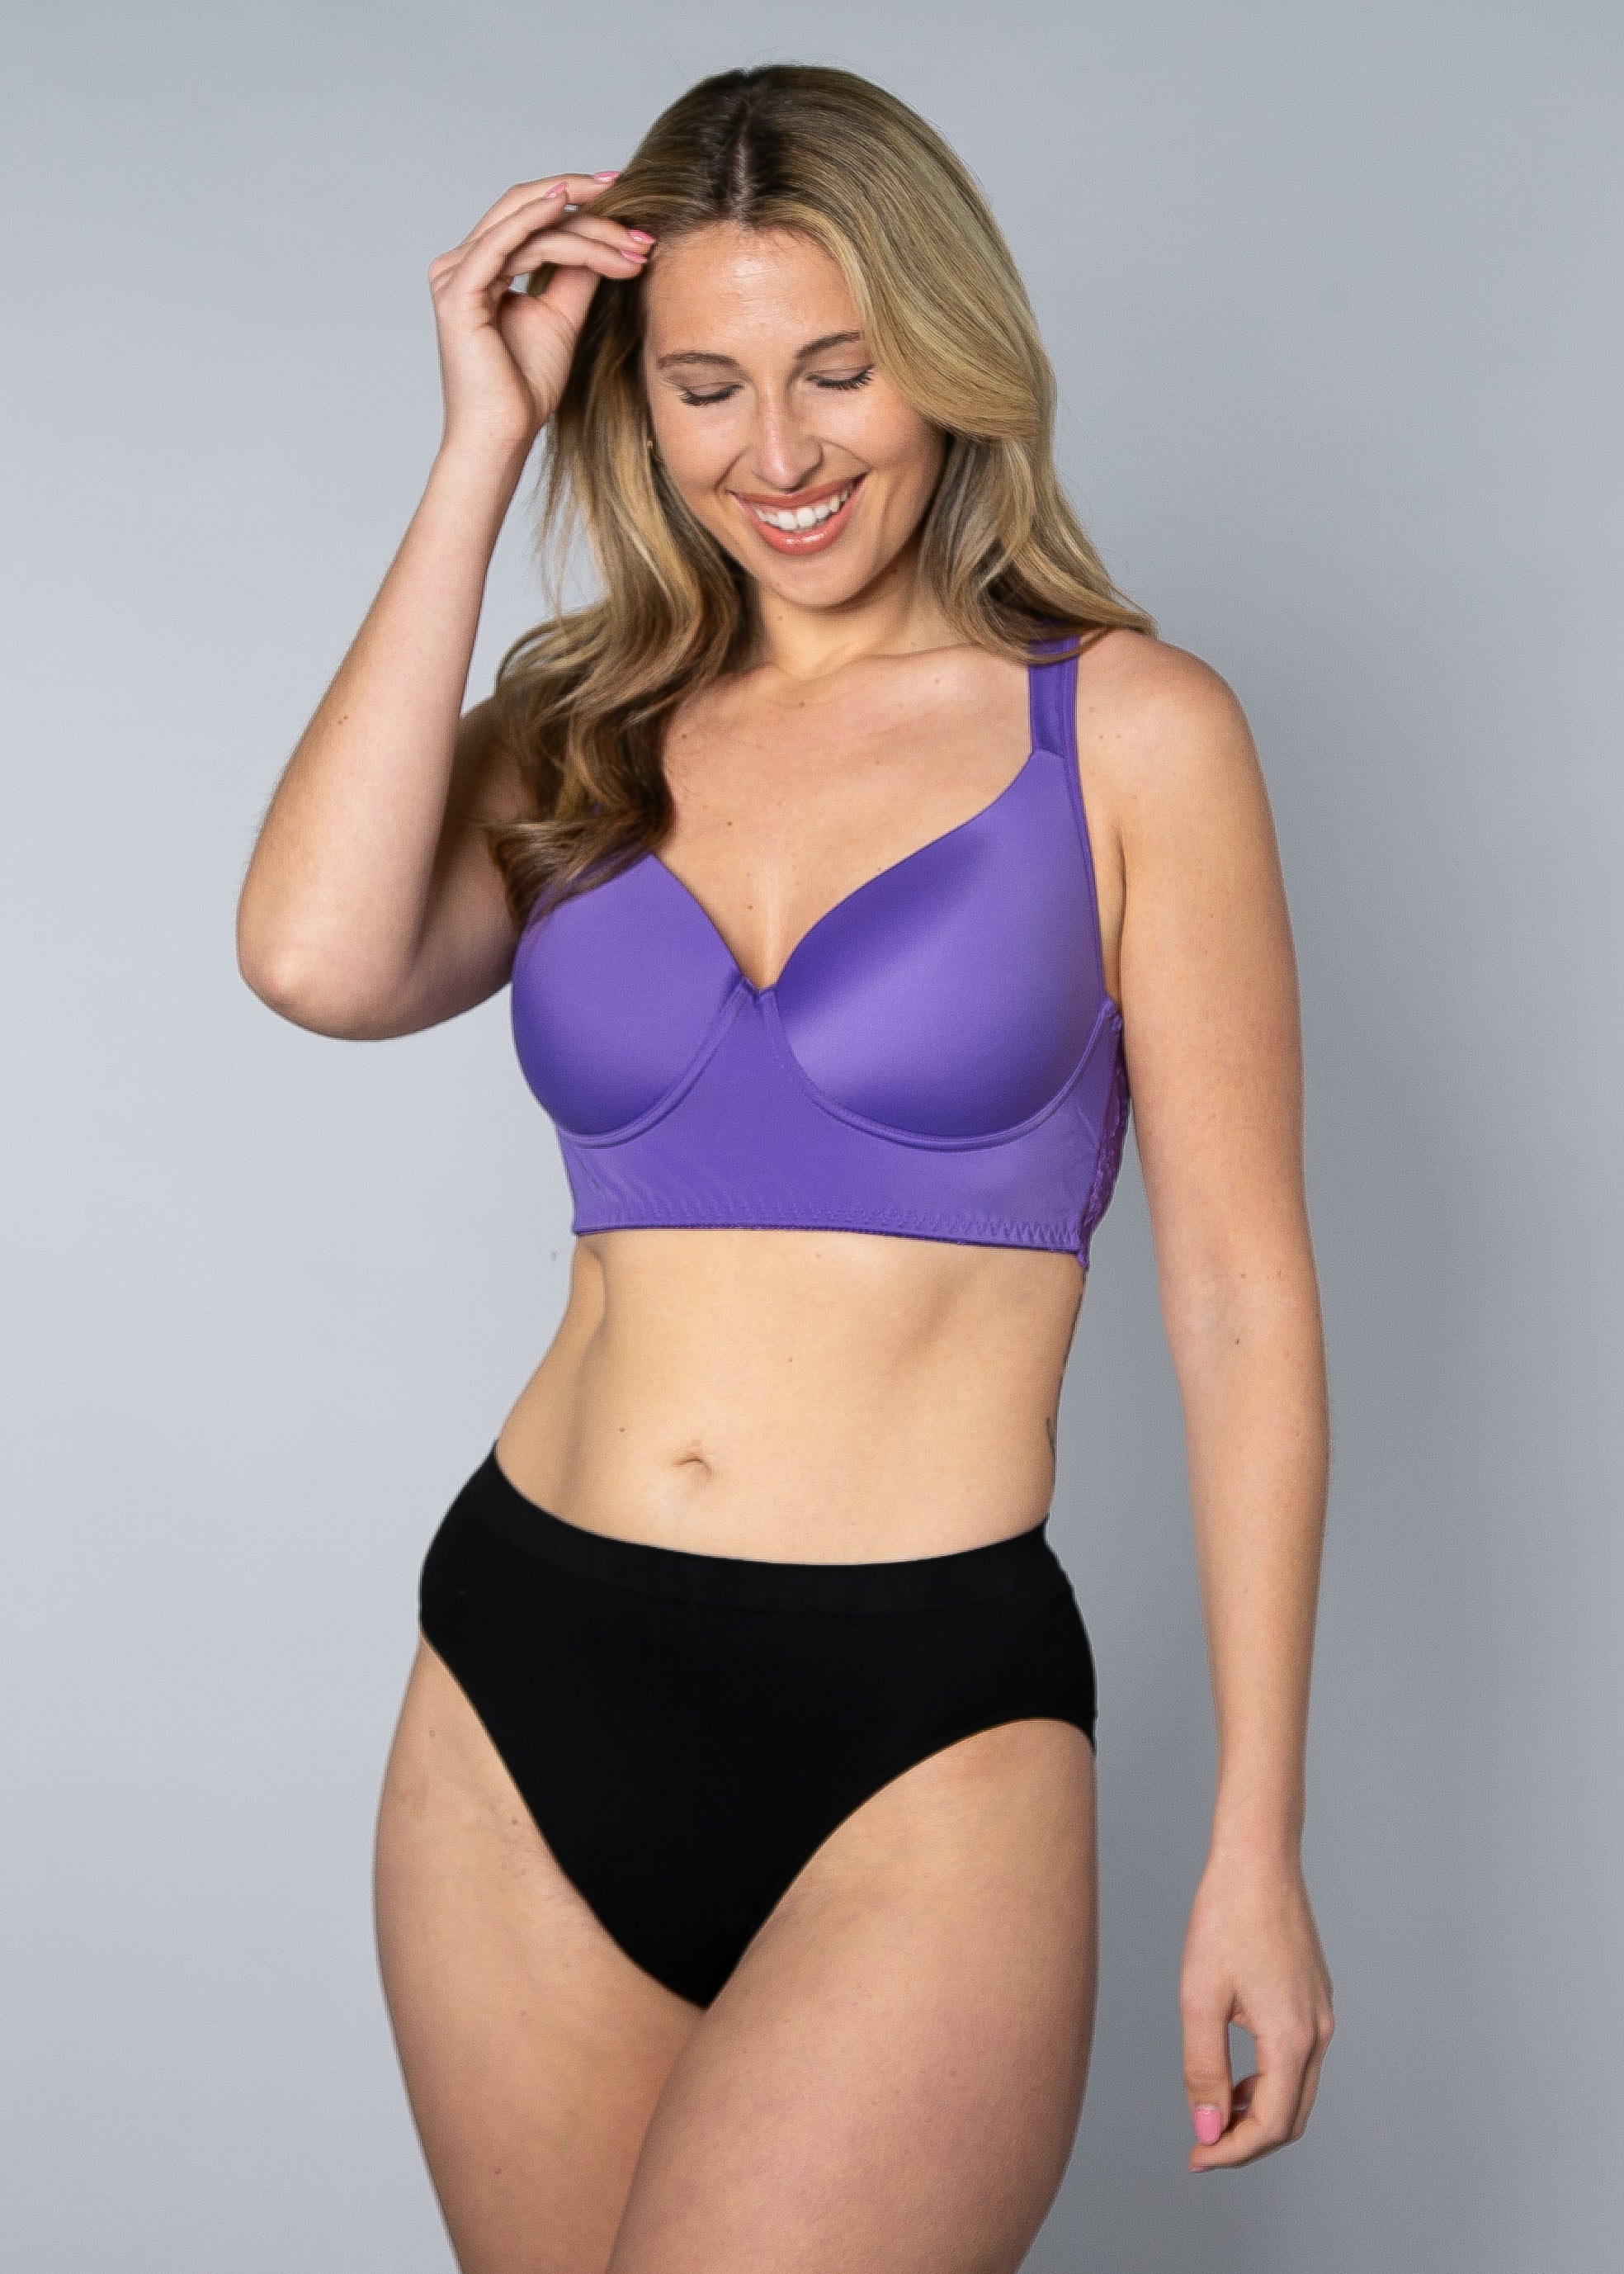 Wholesale plus size lingerie canada For An Irresistible Look